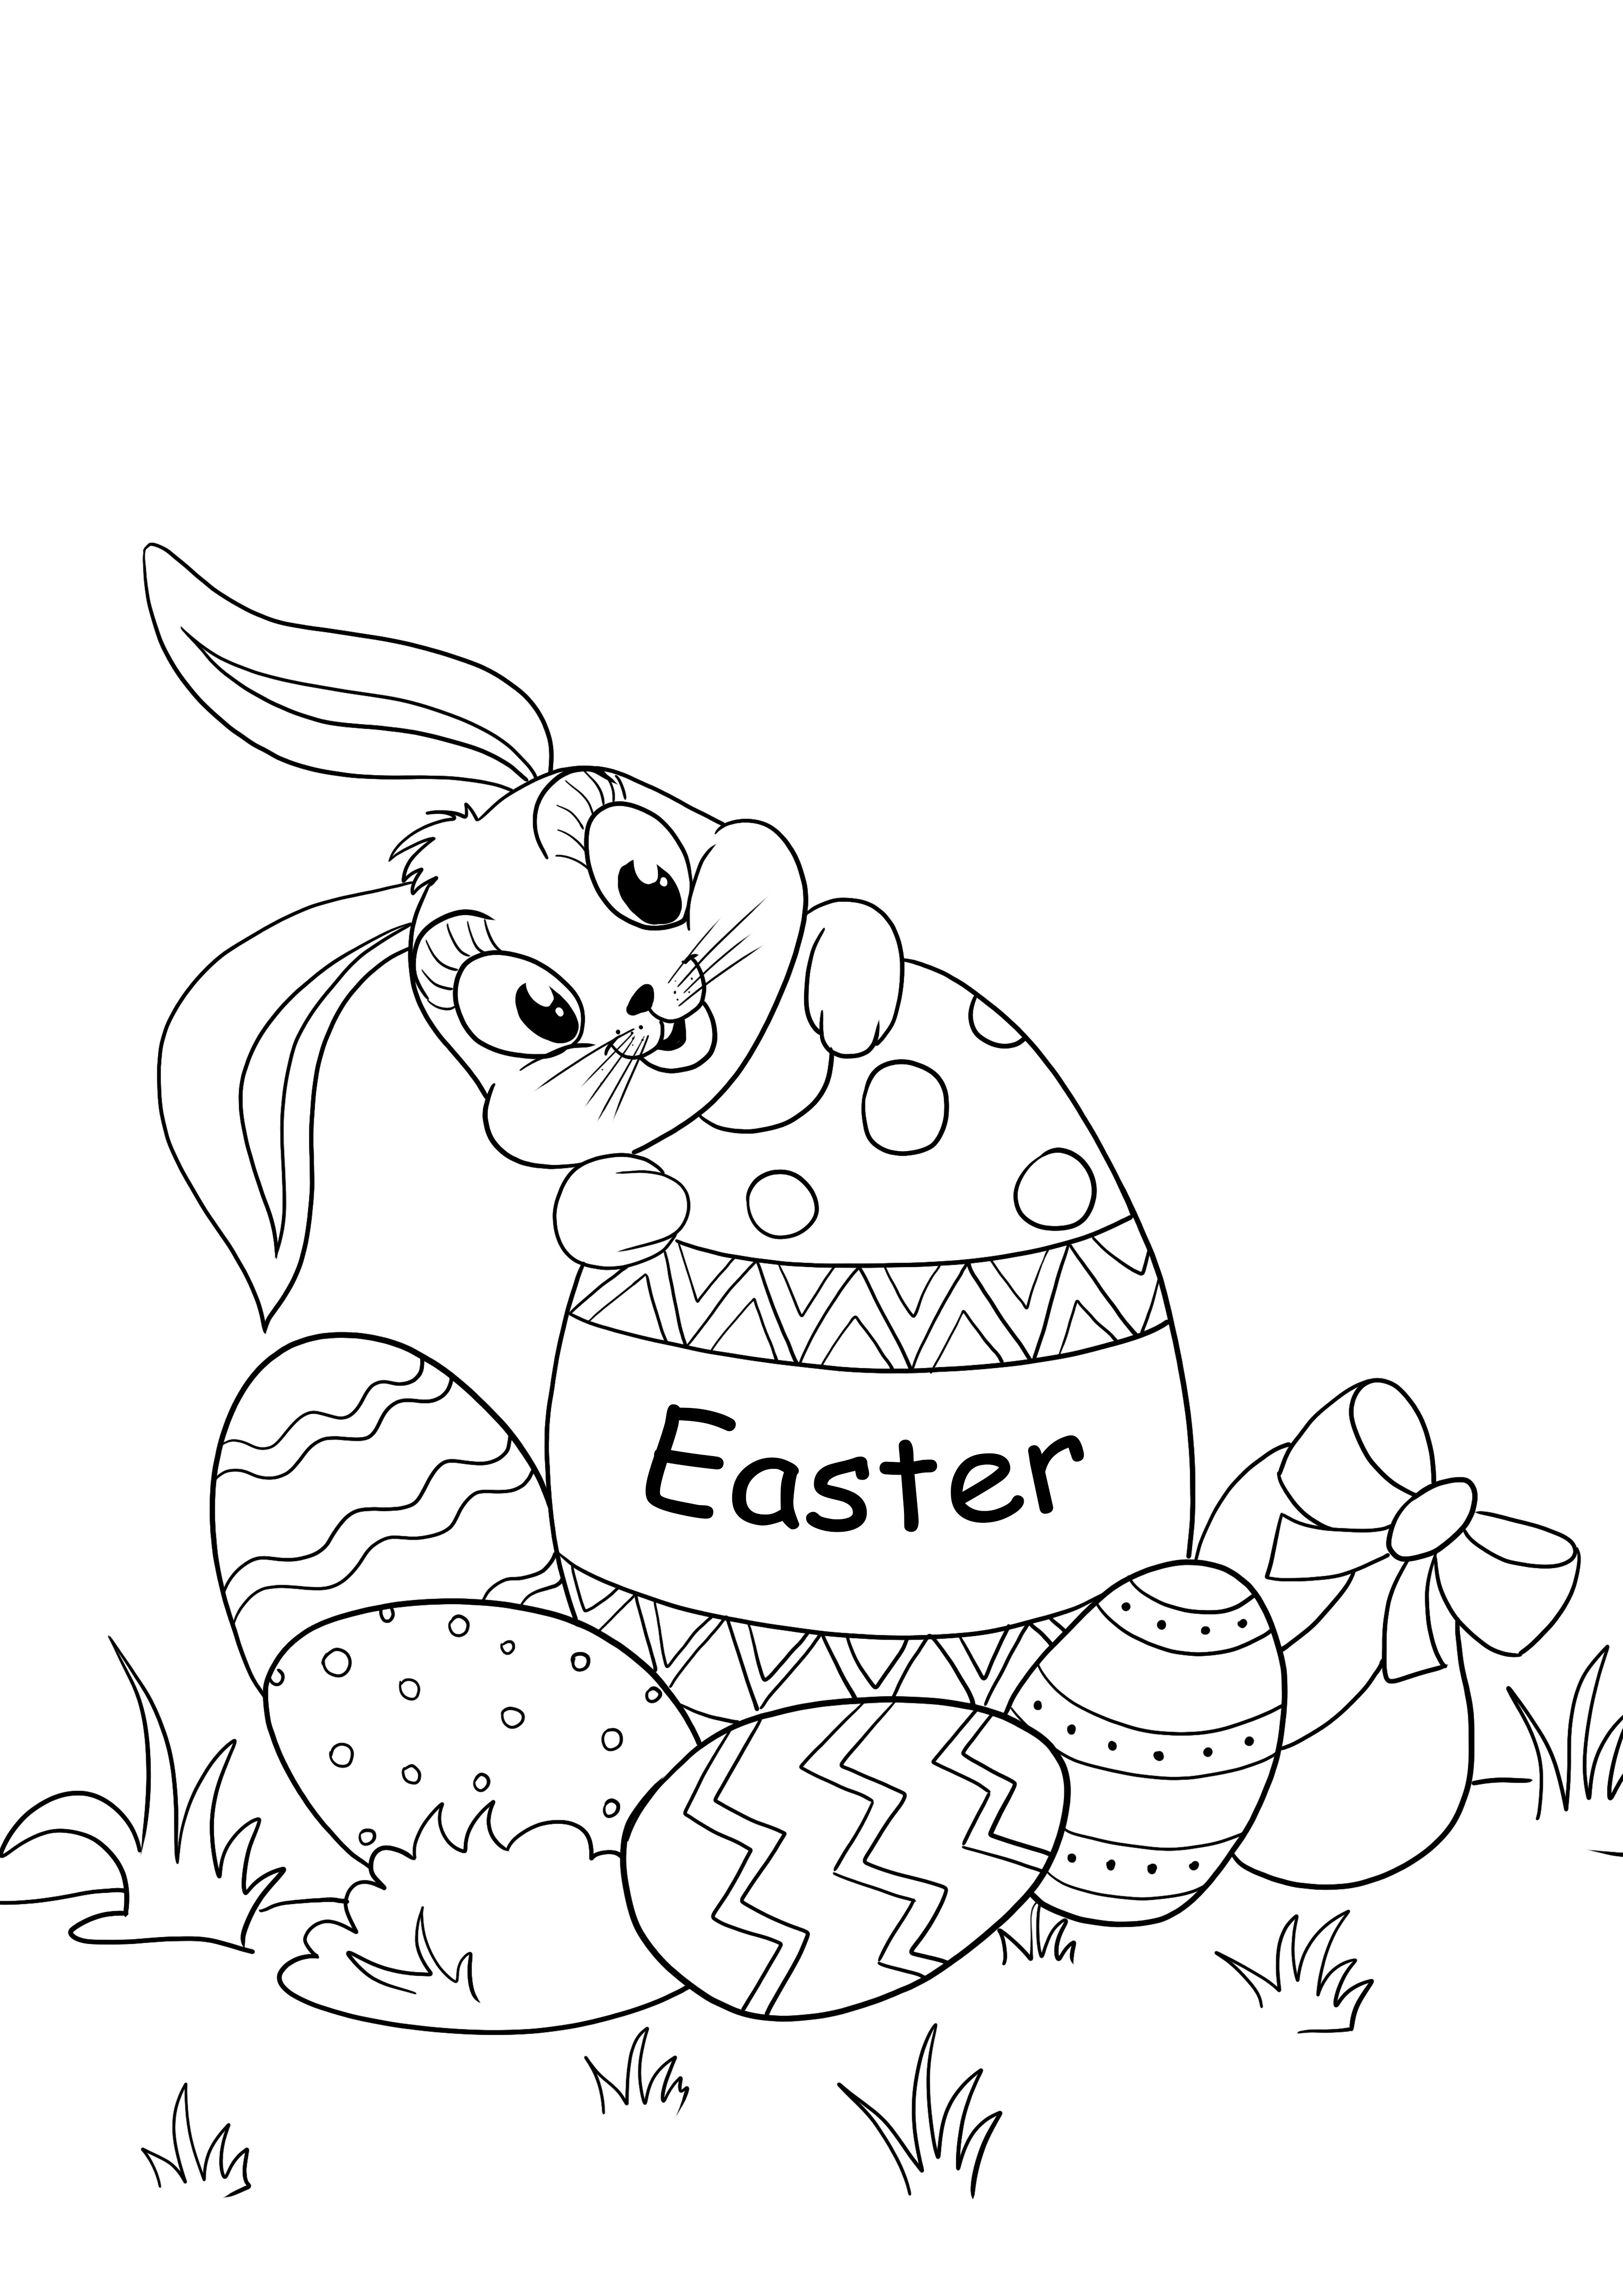 Super cute Easter bunny and eggs coloring and free printing image